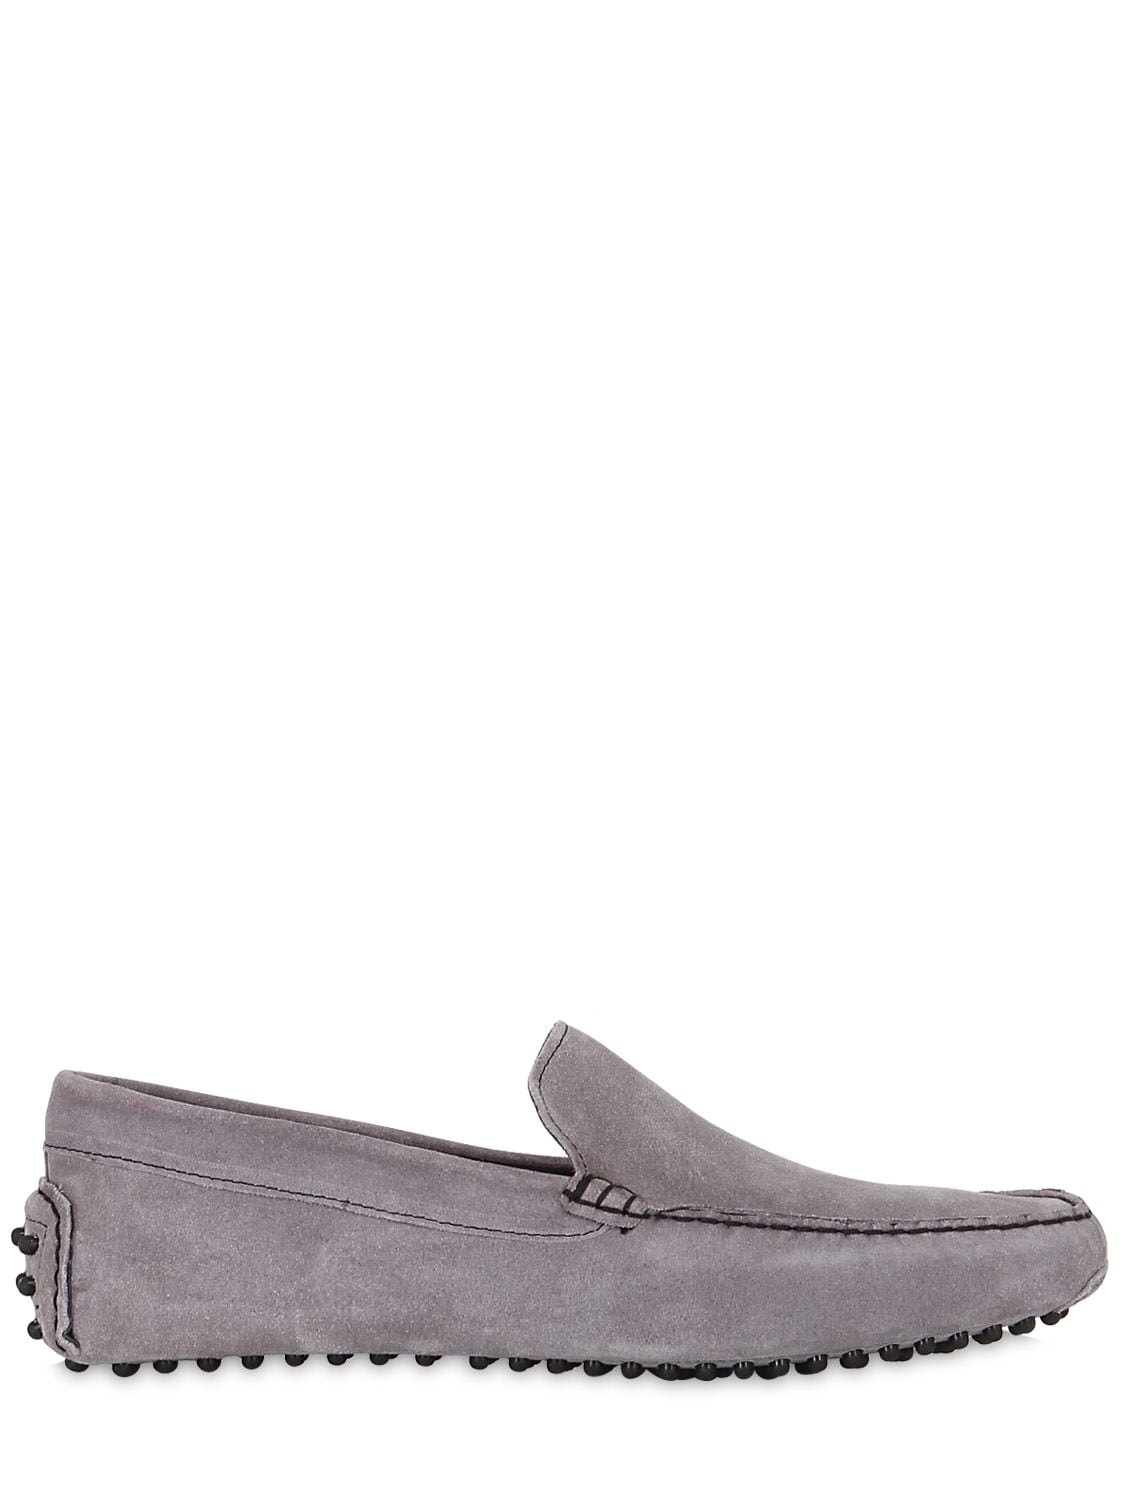 Calzoleria Toscana Handmade Suede Driving Shoes In Grey